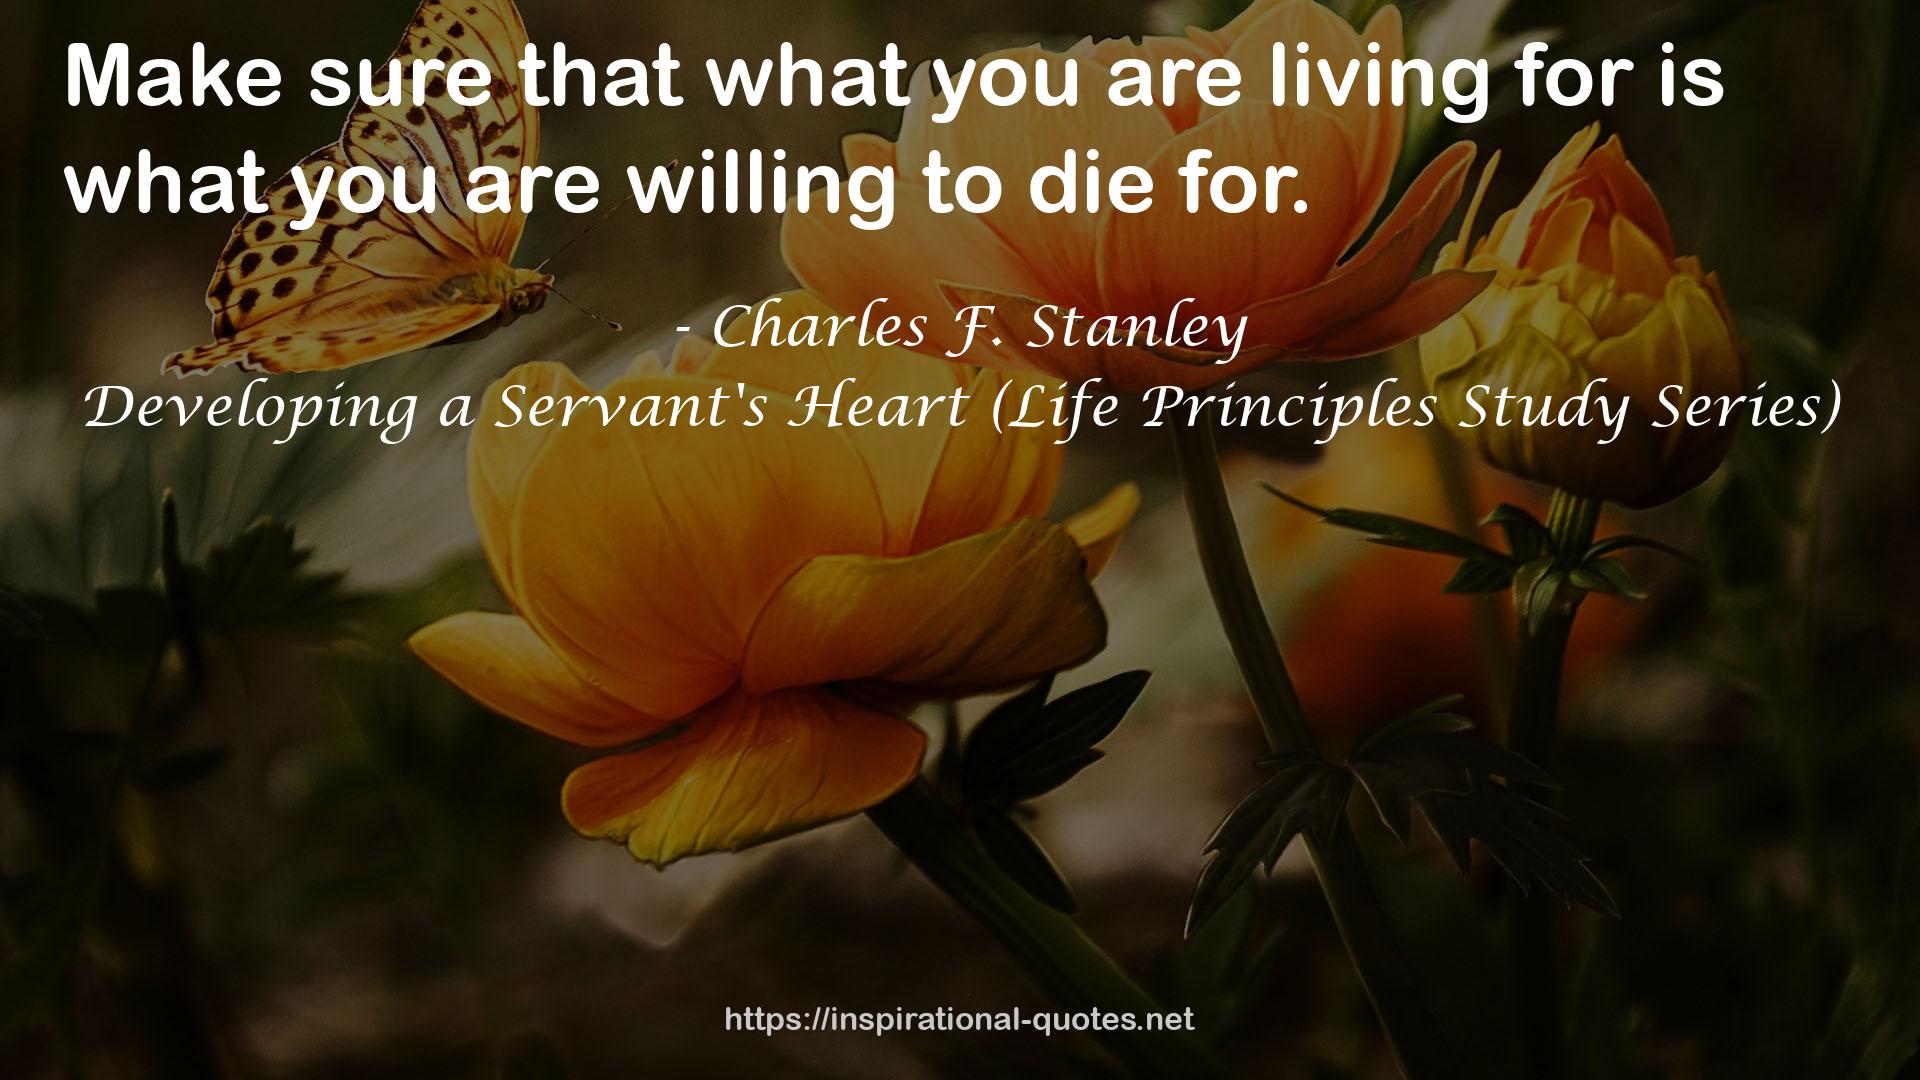 Developing a Servant's Heart (Life Principles Study Series) QUOTES